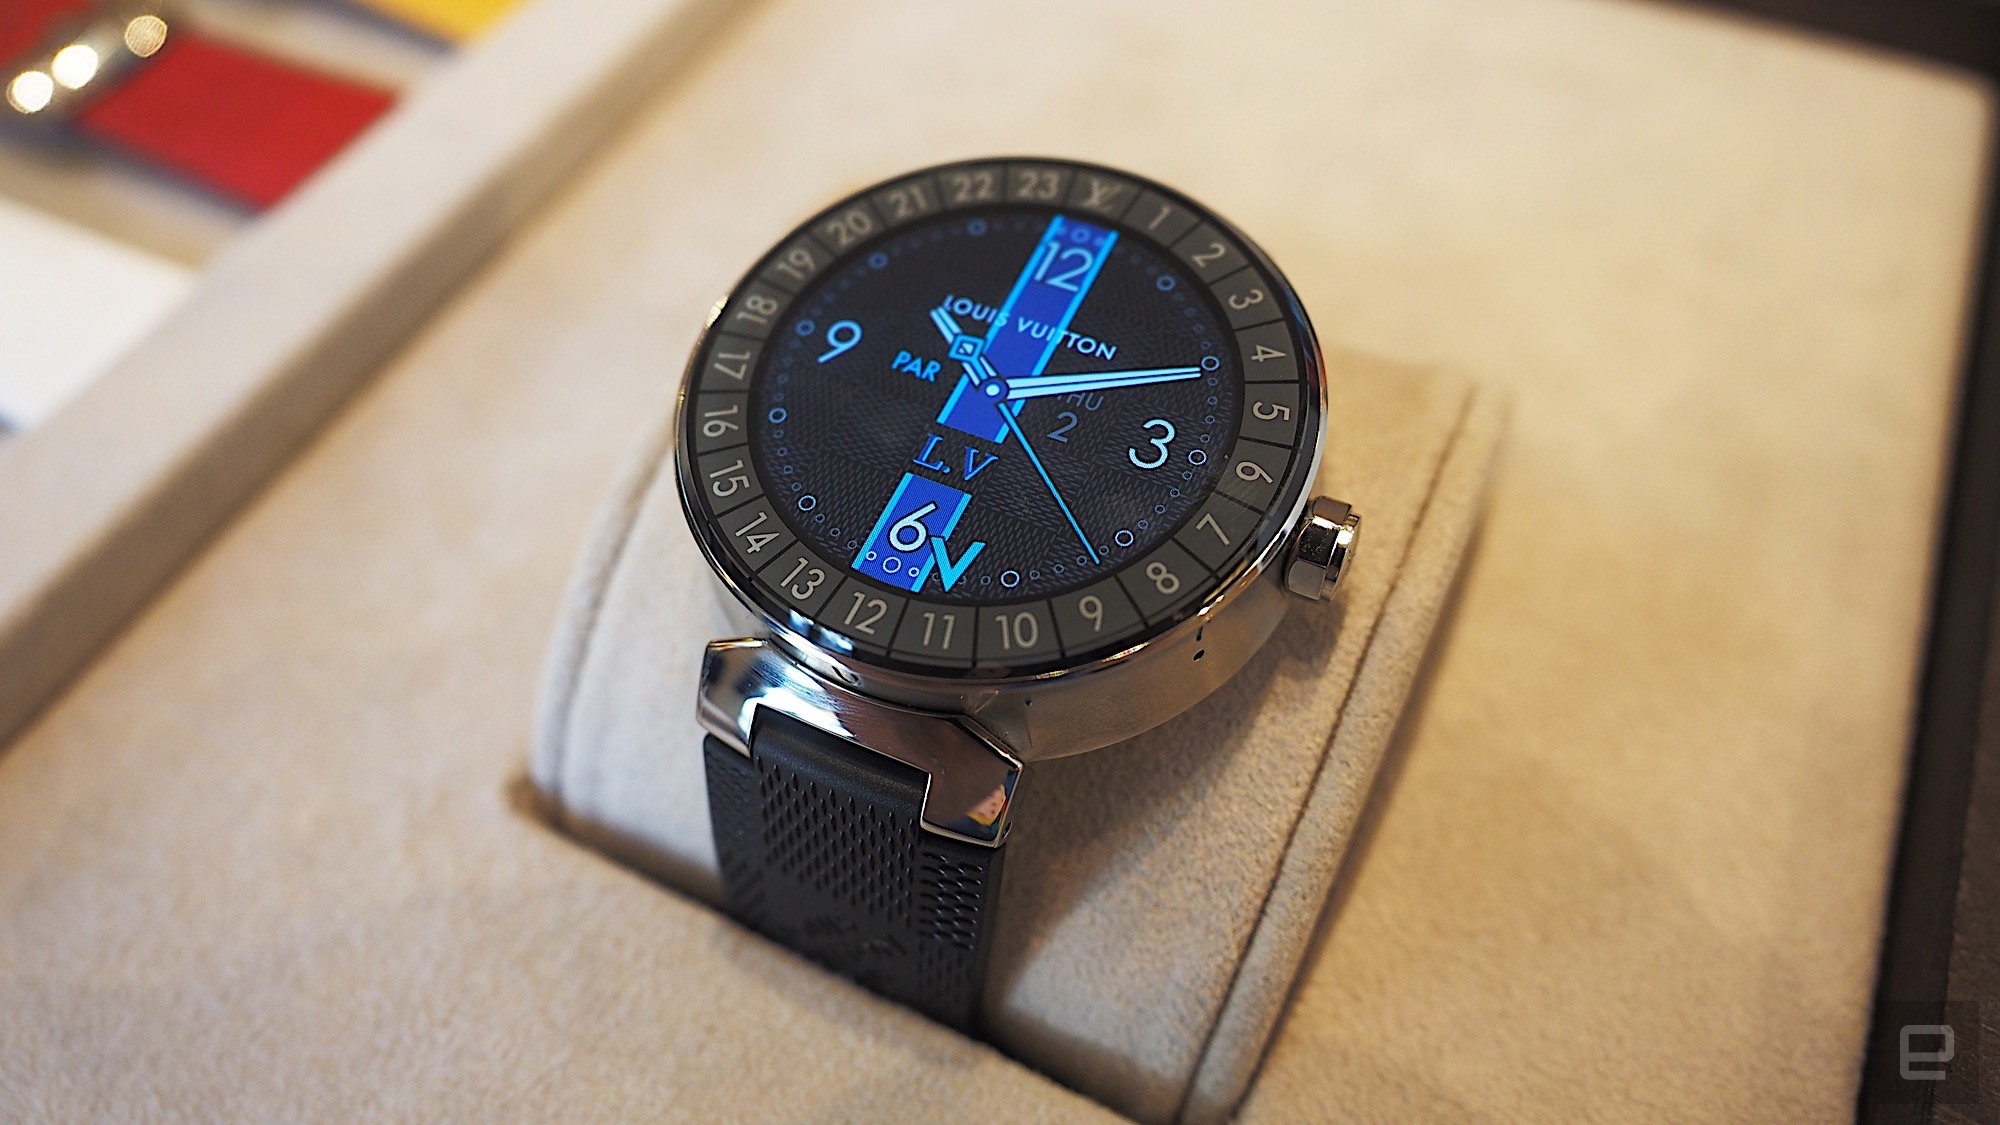 Louis Vuitton's smartwatch is an extravagant take on Android Wear | DeviceDaily.com